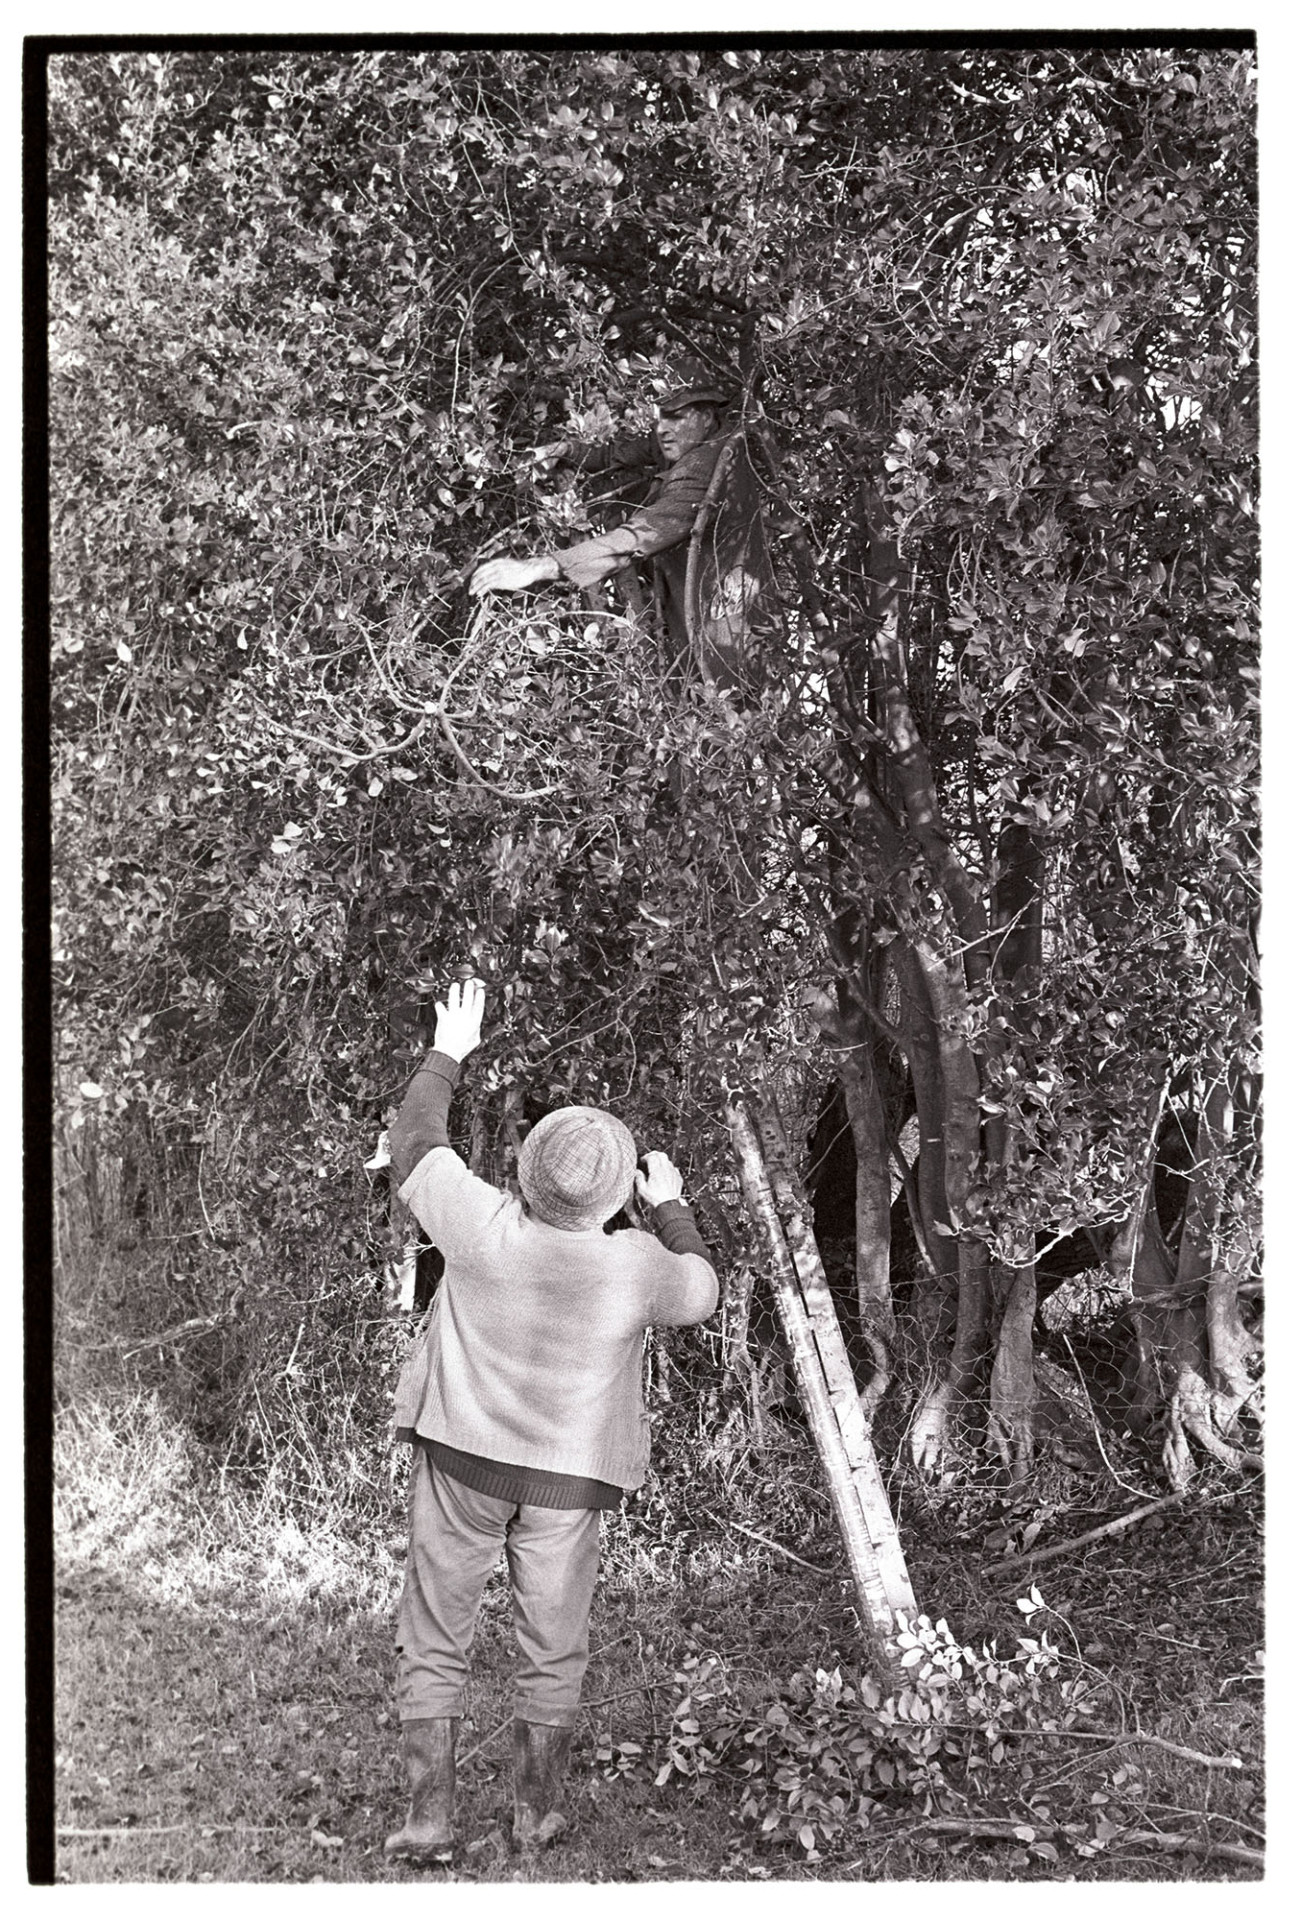 Two farmers cutting holly for Christmas decorations.
[Alf Pugsley up a ladder in a holly tree at Langham, Dolton. He is cutting holly for Christmas decorations. Archie Parkhouse is standing at the foot of the ladder receiving the boughs of holly. A pile of cut branches of holly is at his feet.]